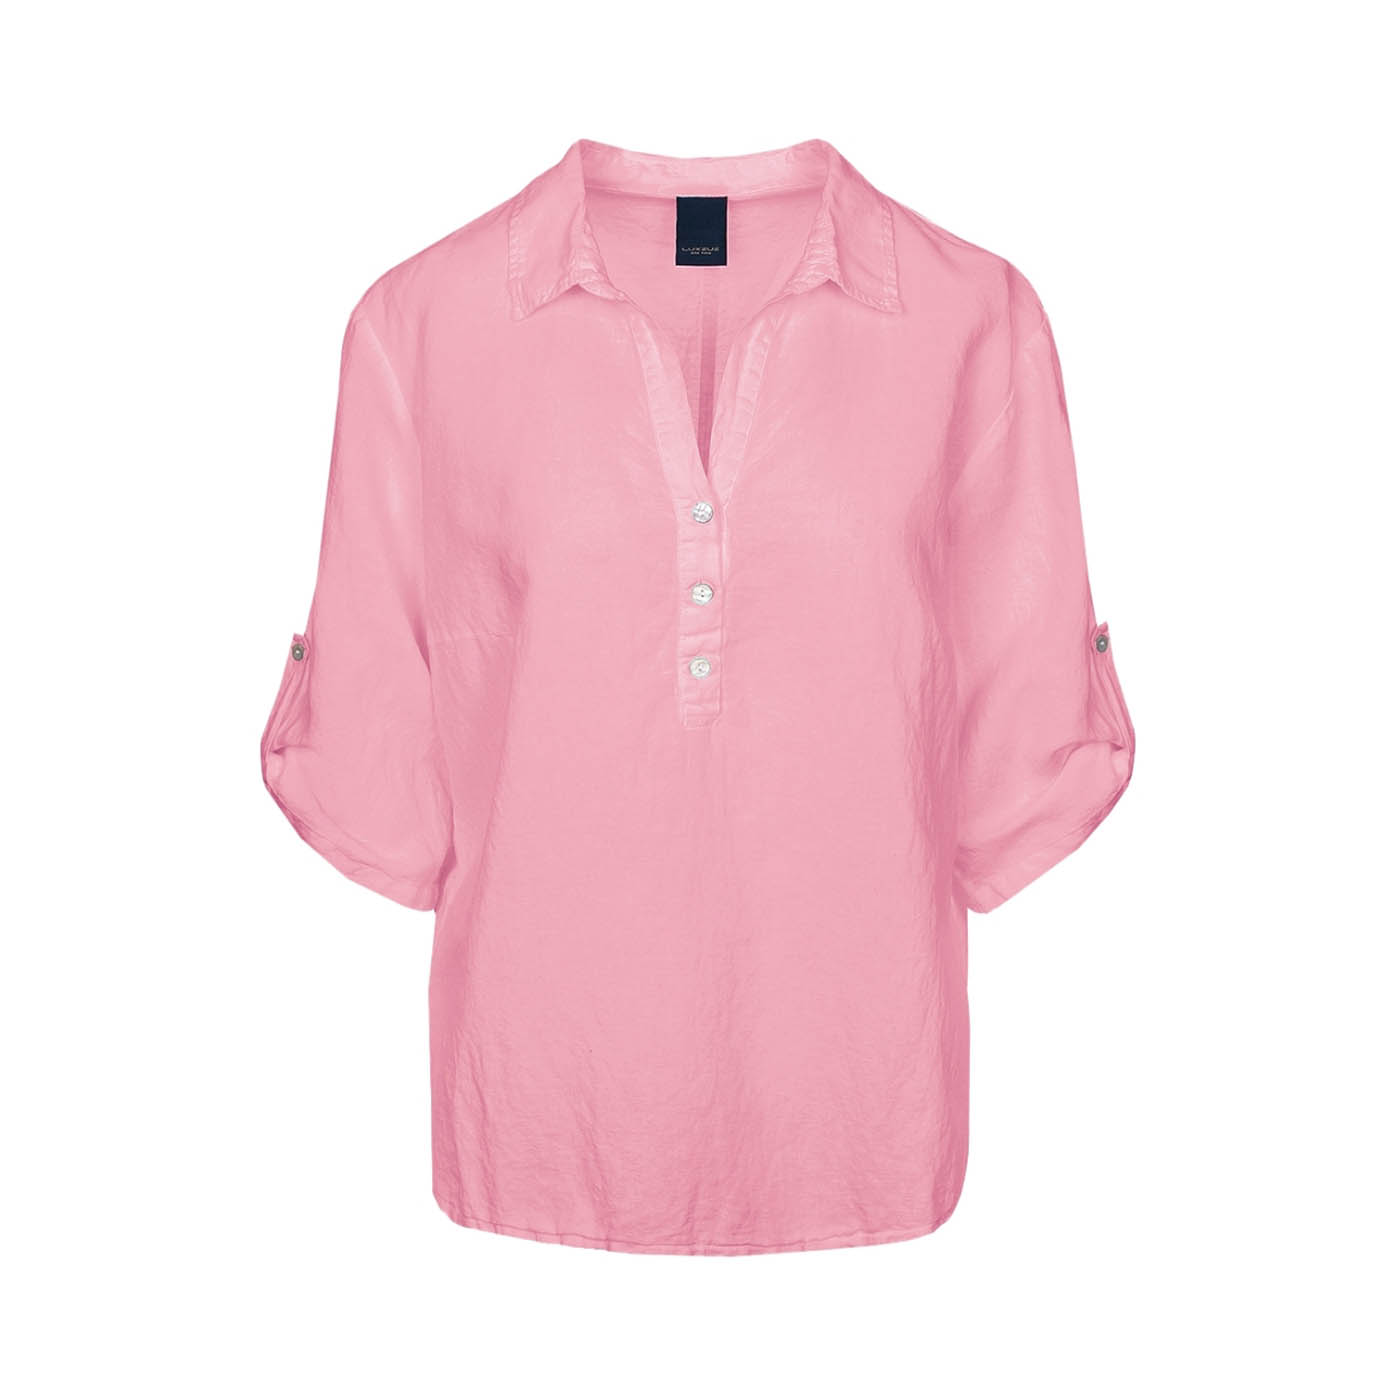 LUXZUZ Siwaia Hør-Bomuld bluse Candy Pink